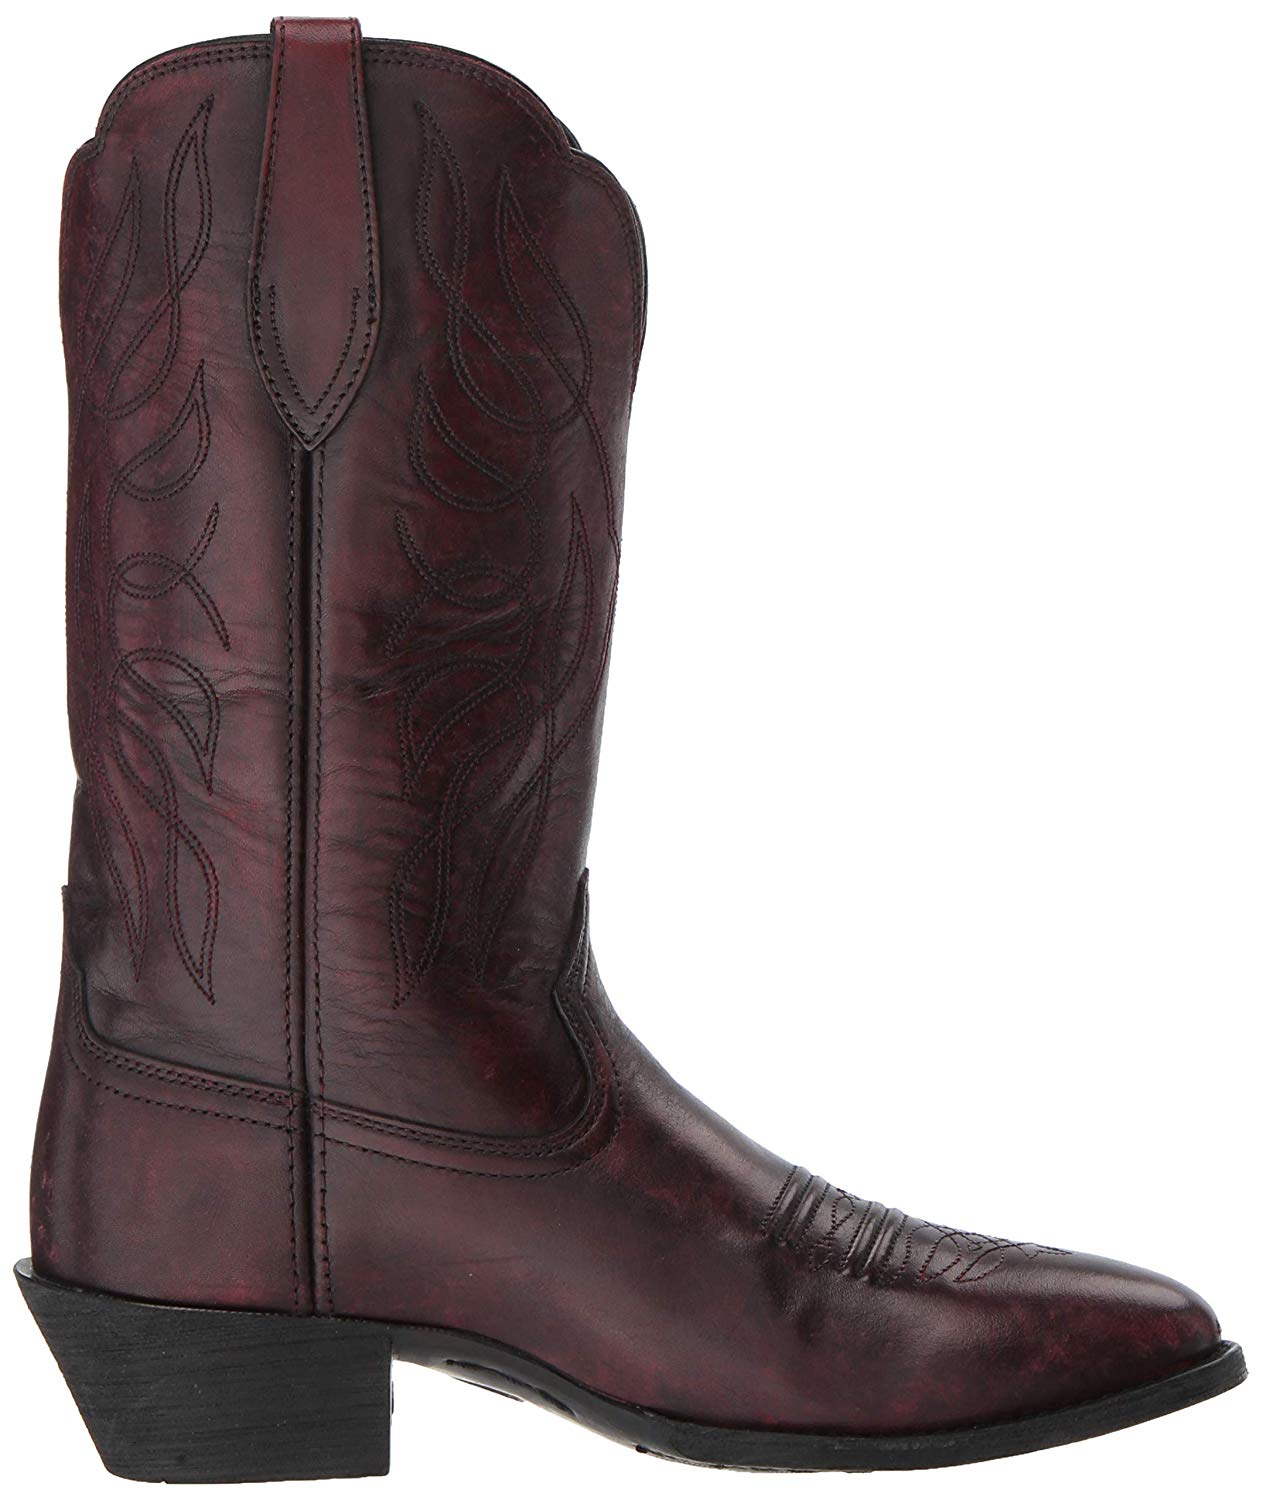 ARIAT Men's Heritage Western R Toe Boot, Ombre Red, Size 8.5 tNeW | eBay